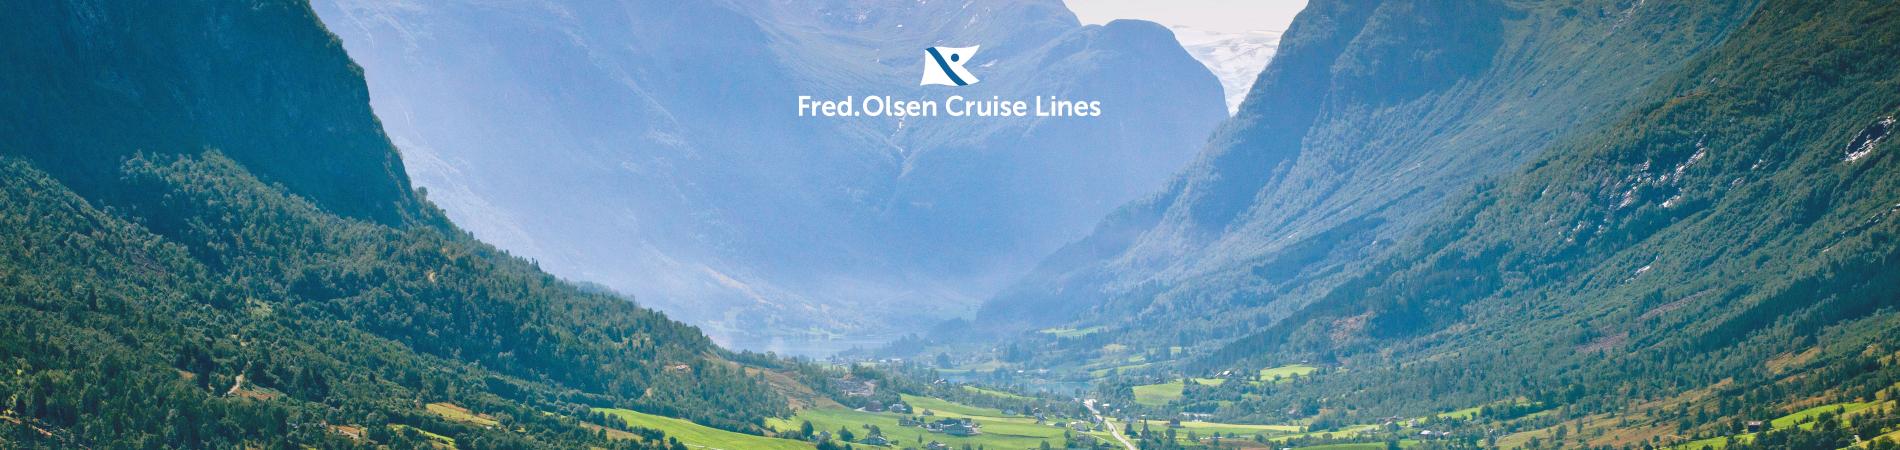 Image for Fred.Olsen Cruise Lines